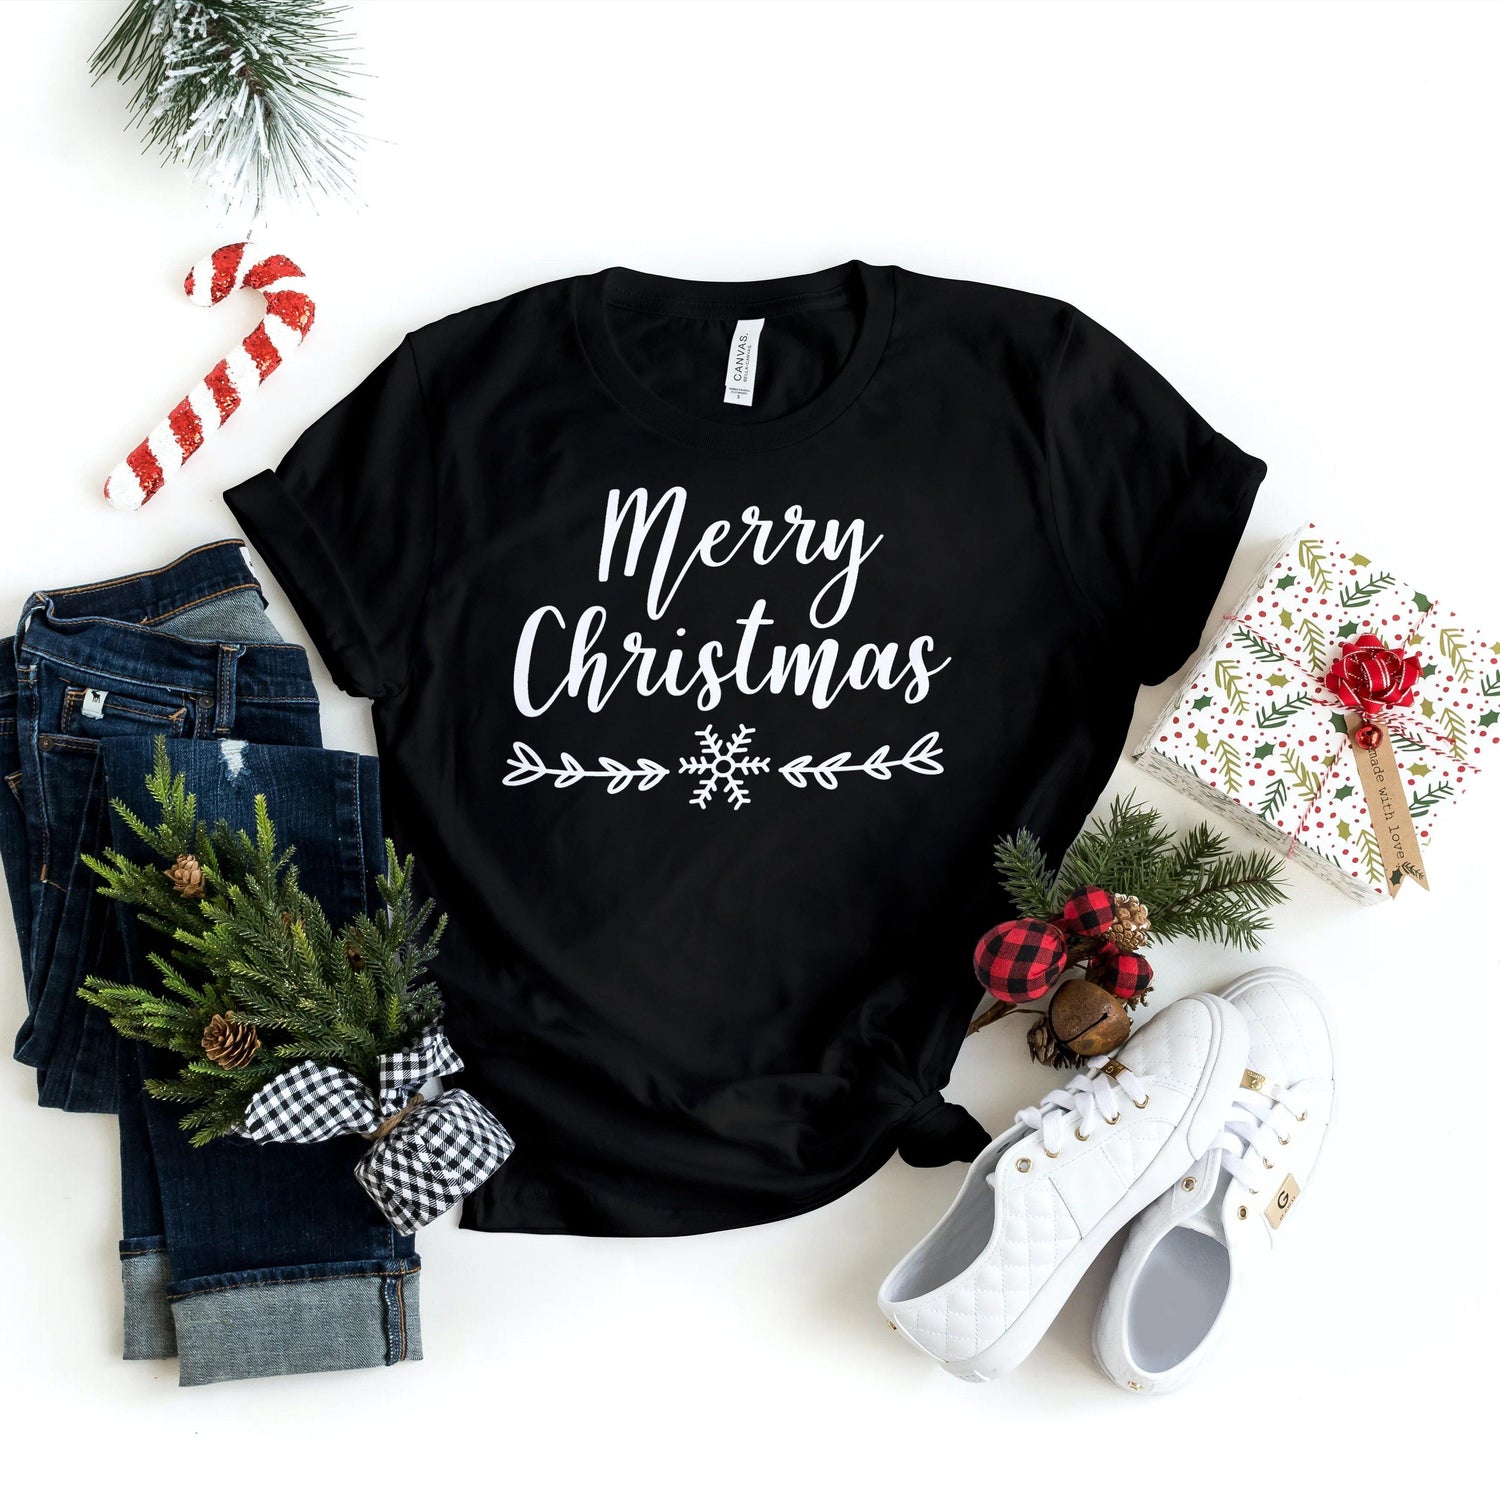 Christmas Shirts - Merry Christmas - Holiday Shirts - Gifts - Healthy Wealthy Skinny